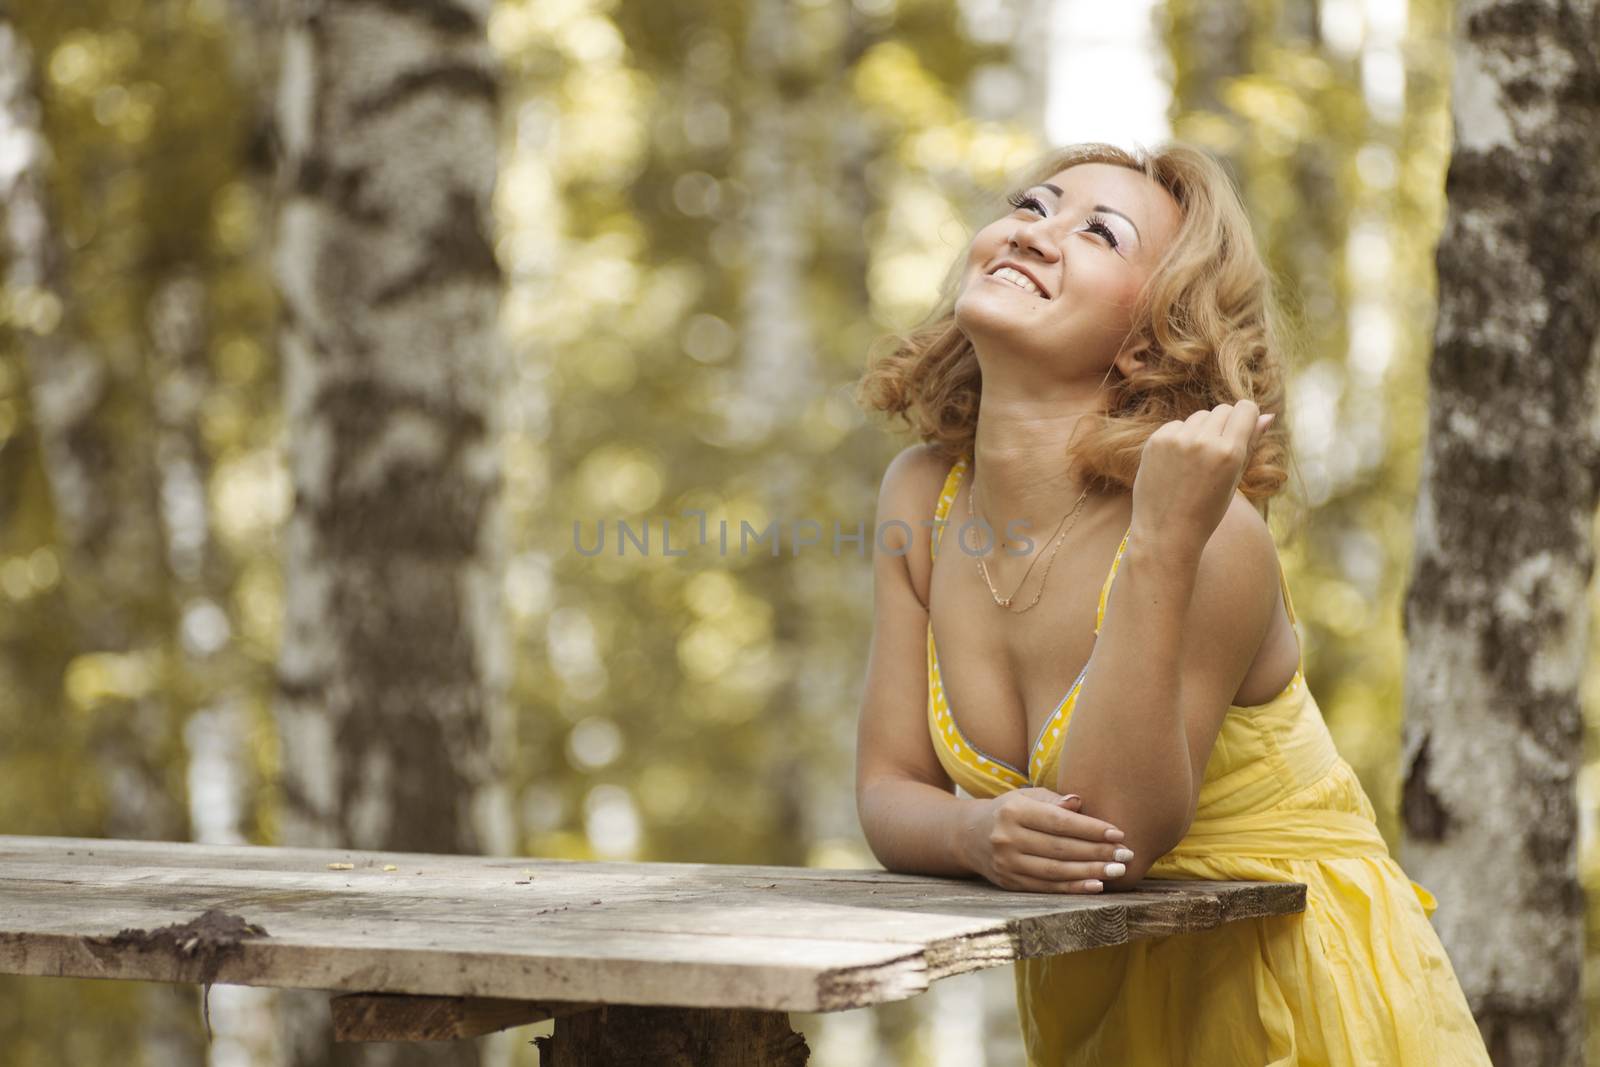 A girl in a yellow dress sitting in the woods behind a wooden table